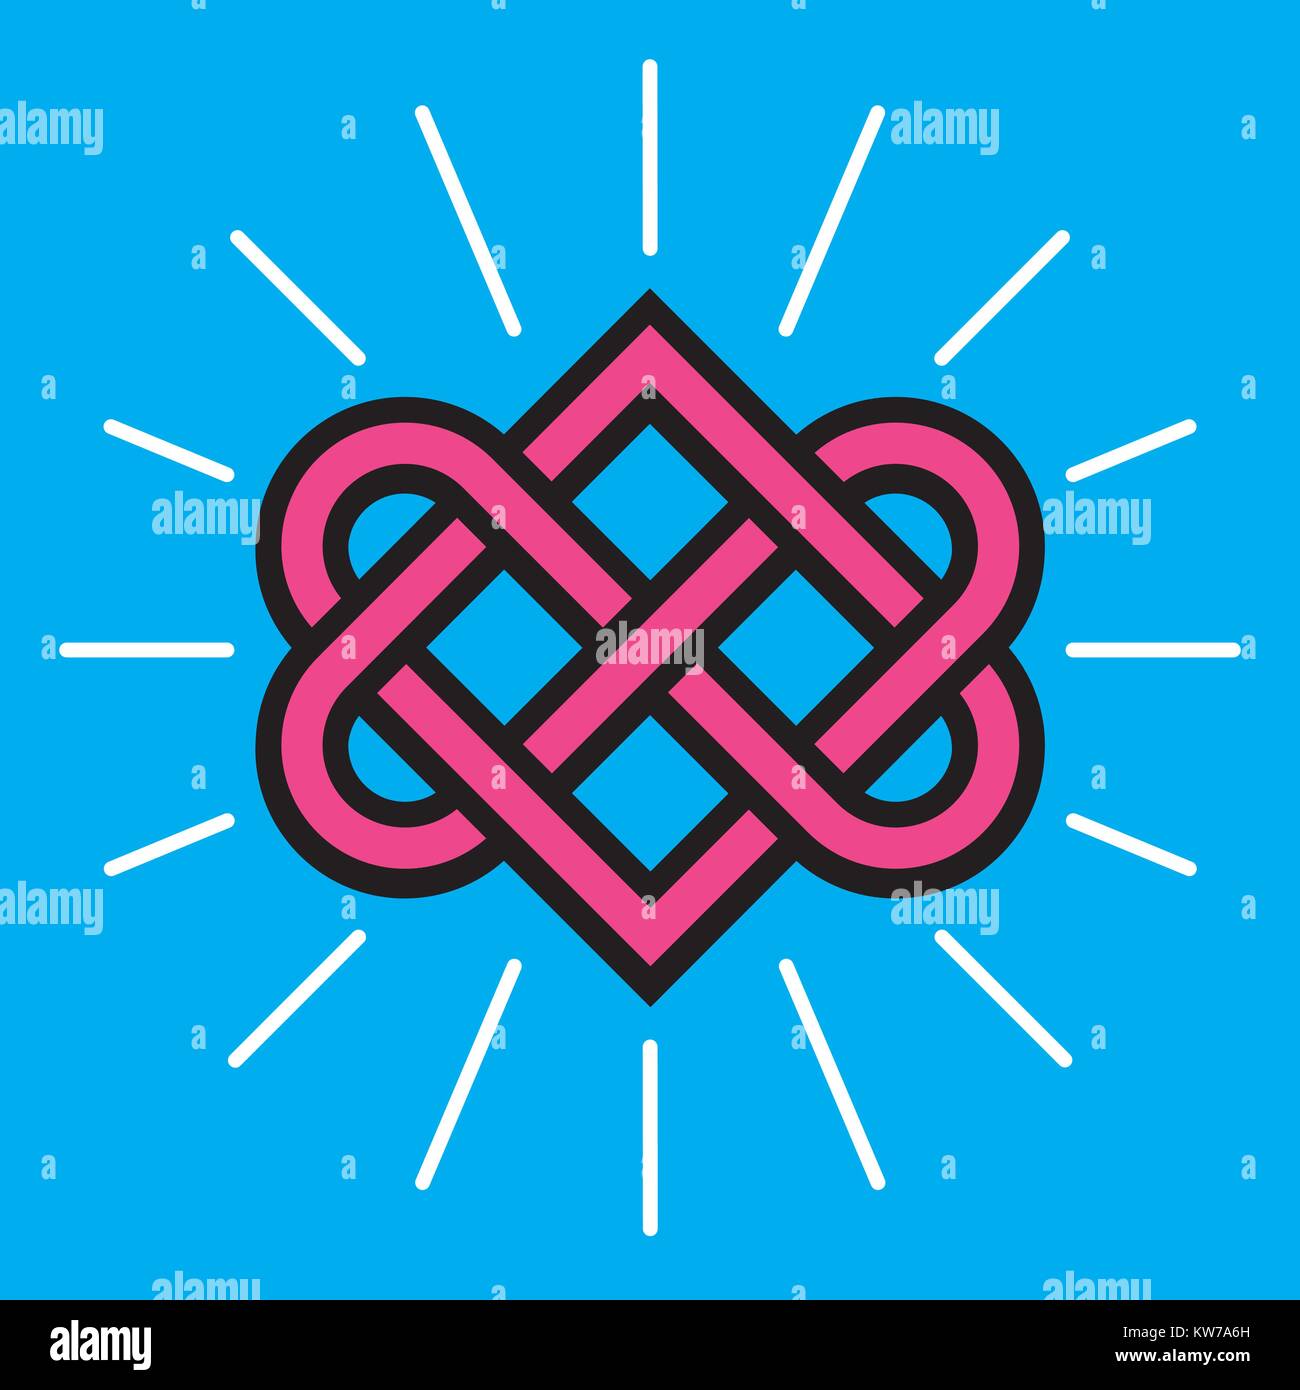 Celtic Love Knot Vector Design. Classic knot design with entwined heart shapes symbolizing eternal love and symmetry. Stock Vector